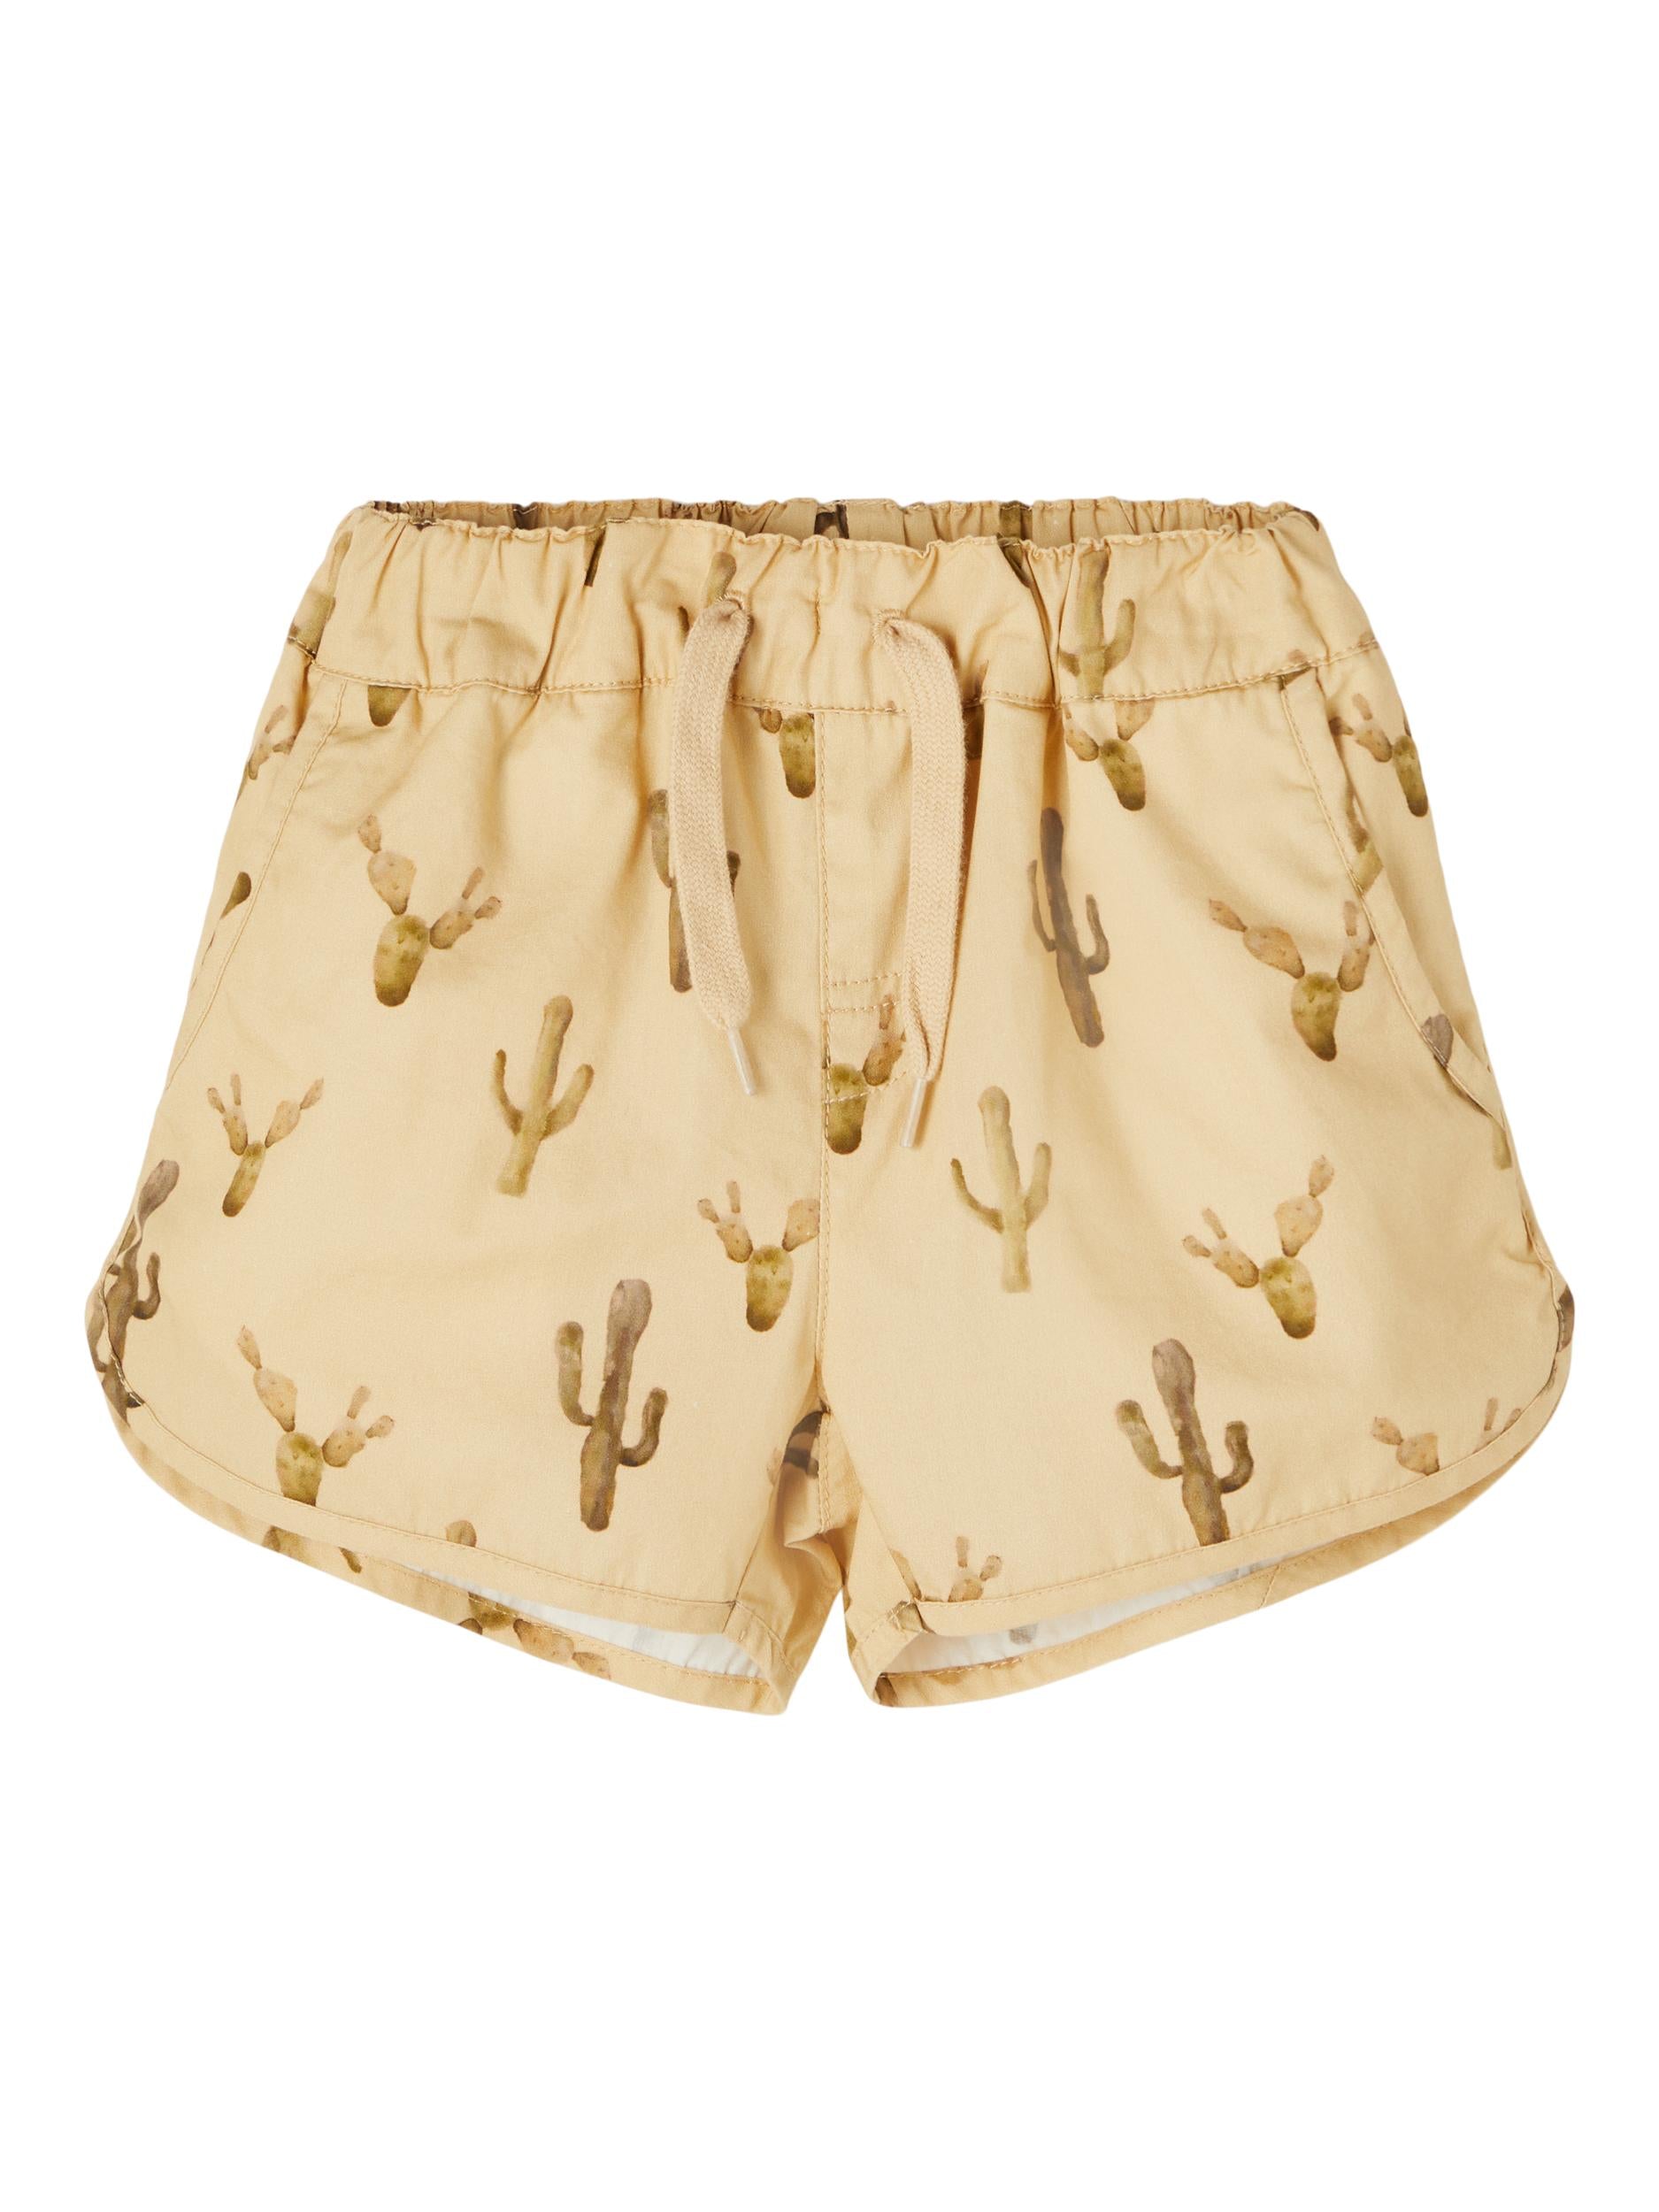 Lil Atelier Bade Shorts Croissant